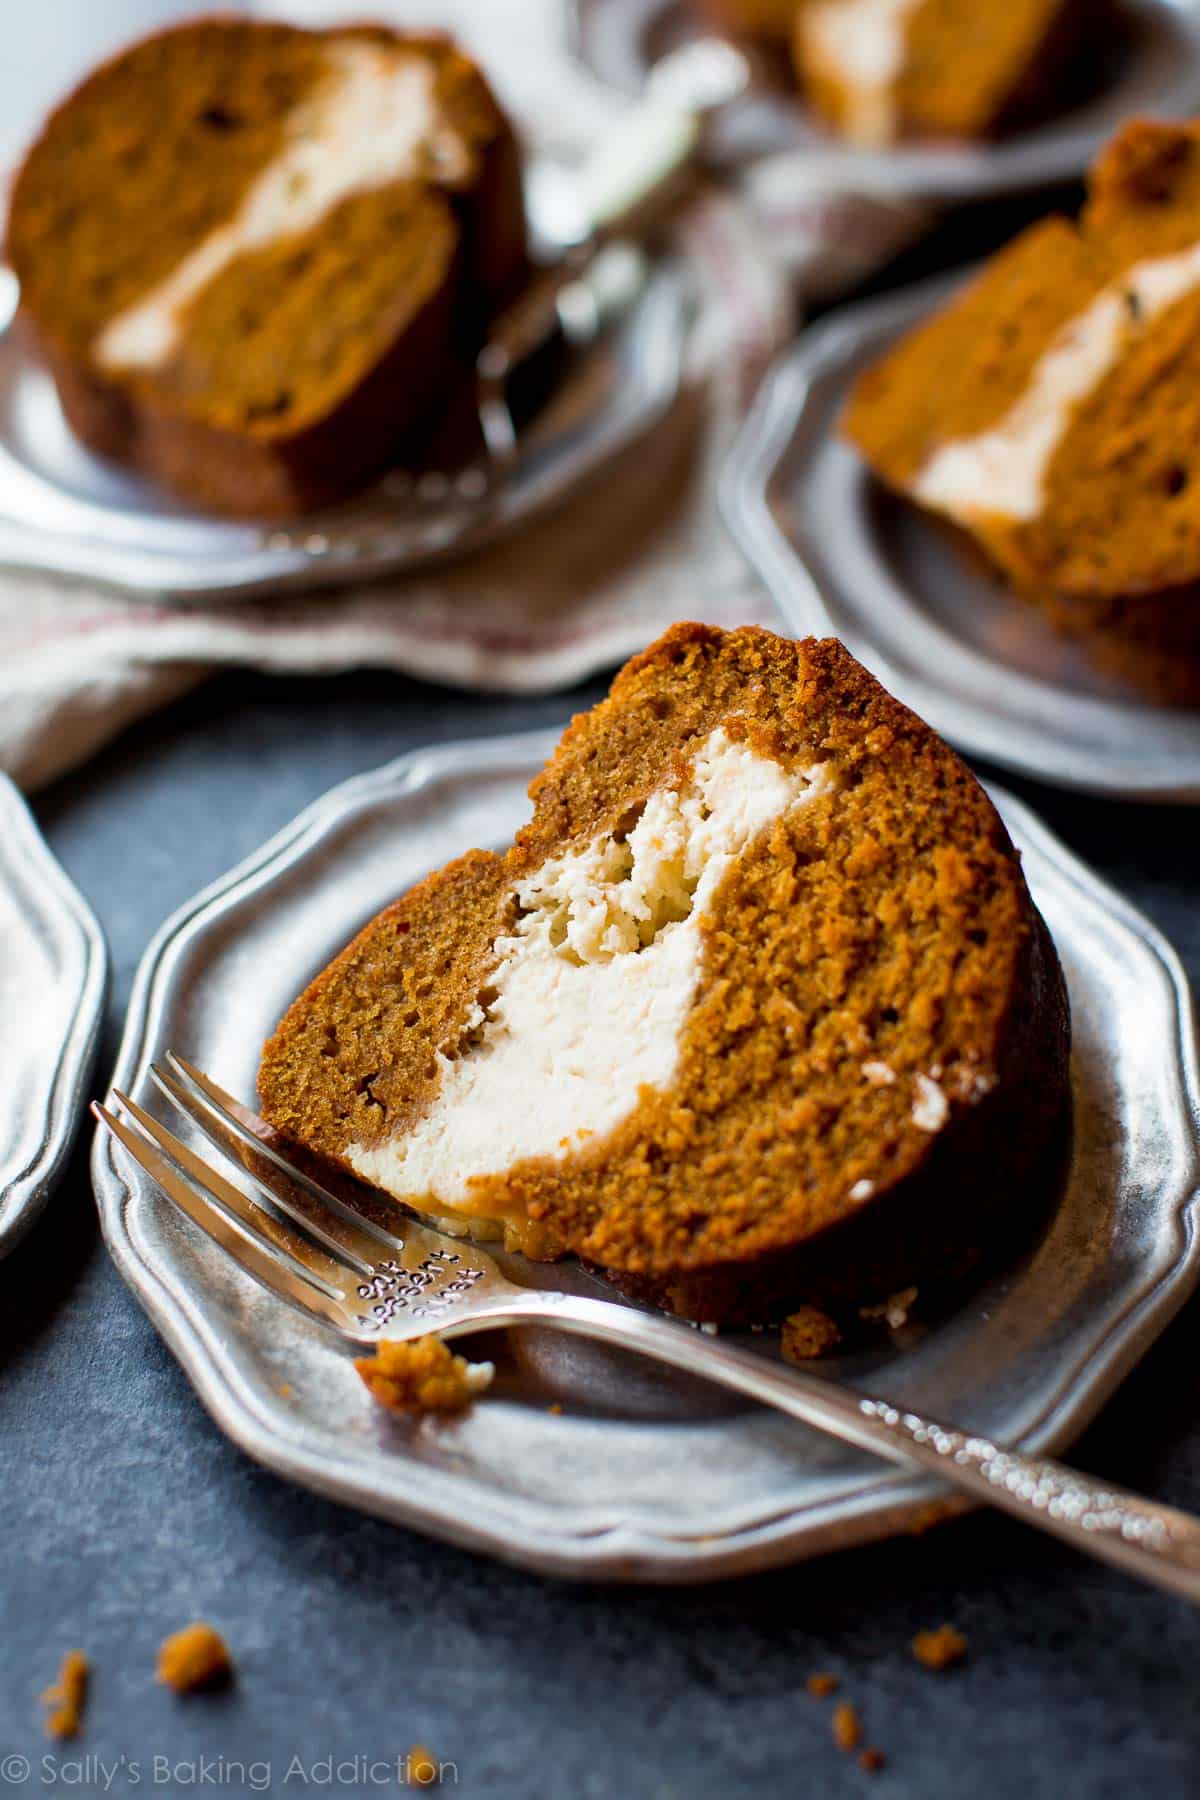 slices of pumpkin cream cheese bundt cake on silver plates with forks